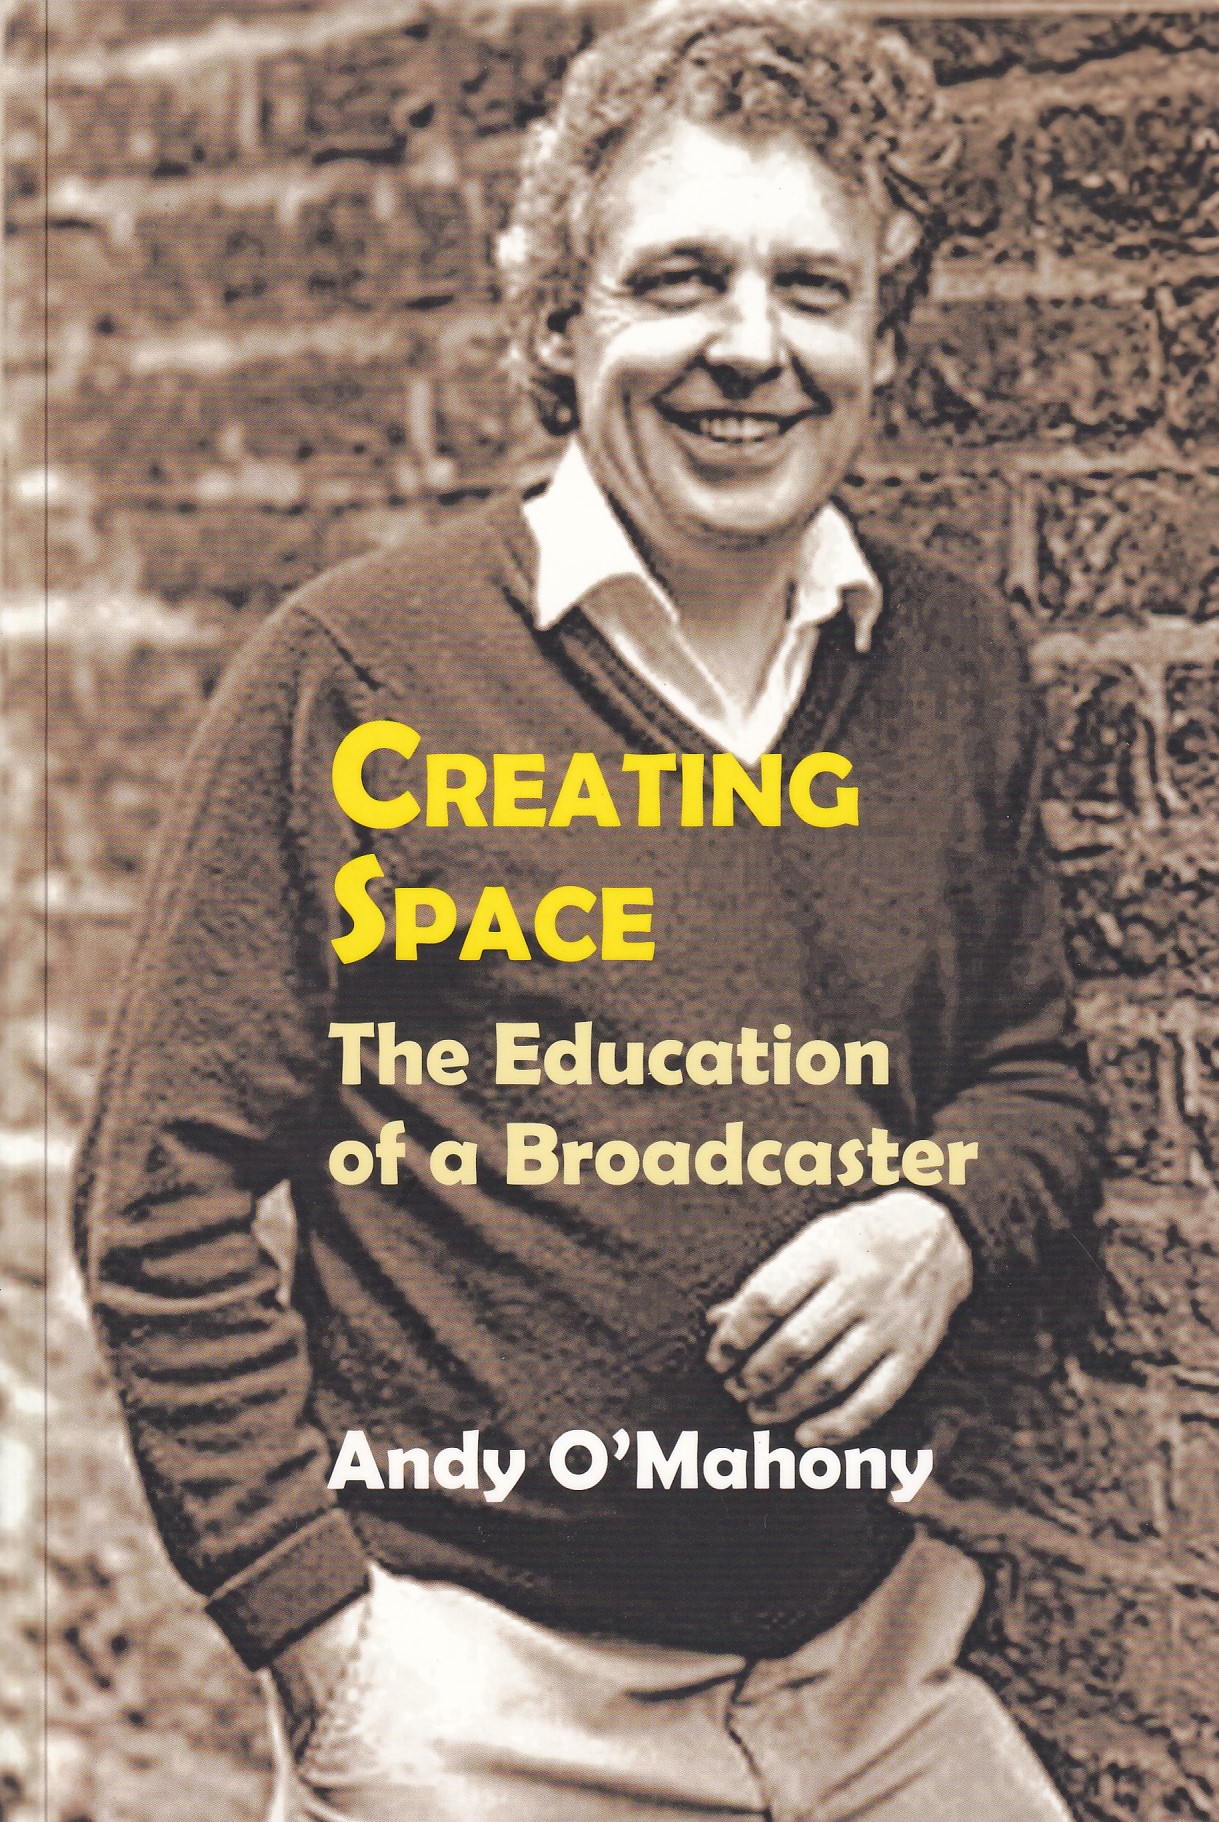 Creating Space: The Education of a Broadcaster | Andy O'Mahony | Charlie Byrne's